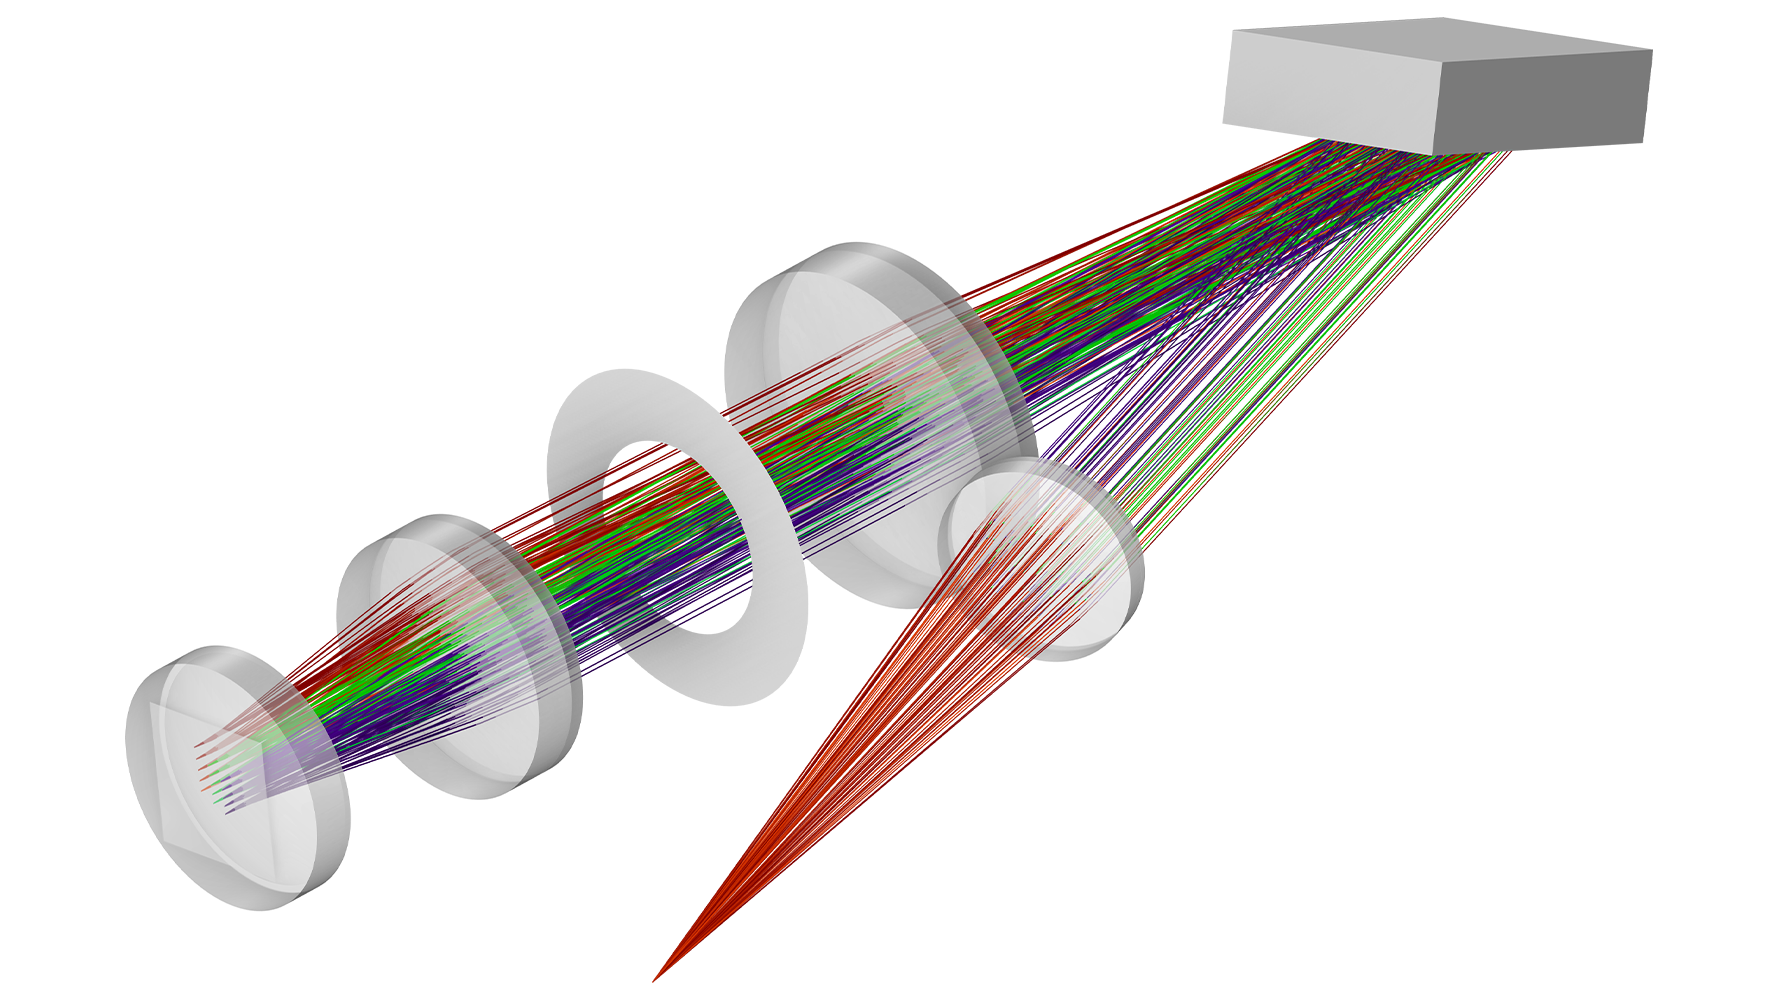 A spectrograph model showing the ray diagram in red, green, and blue.